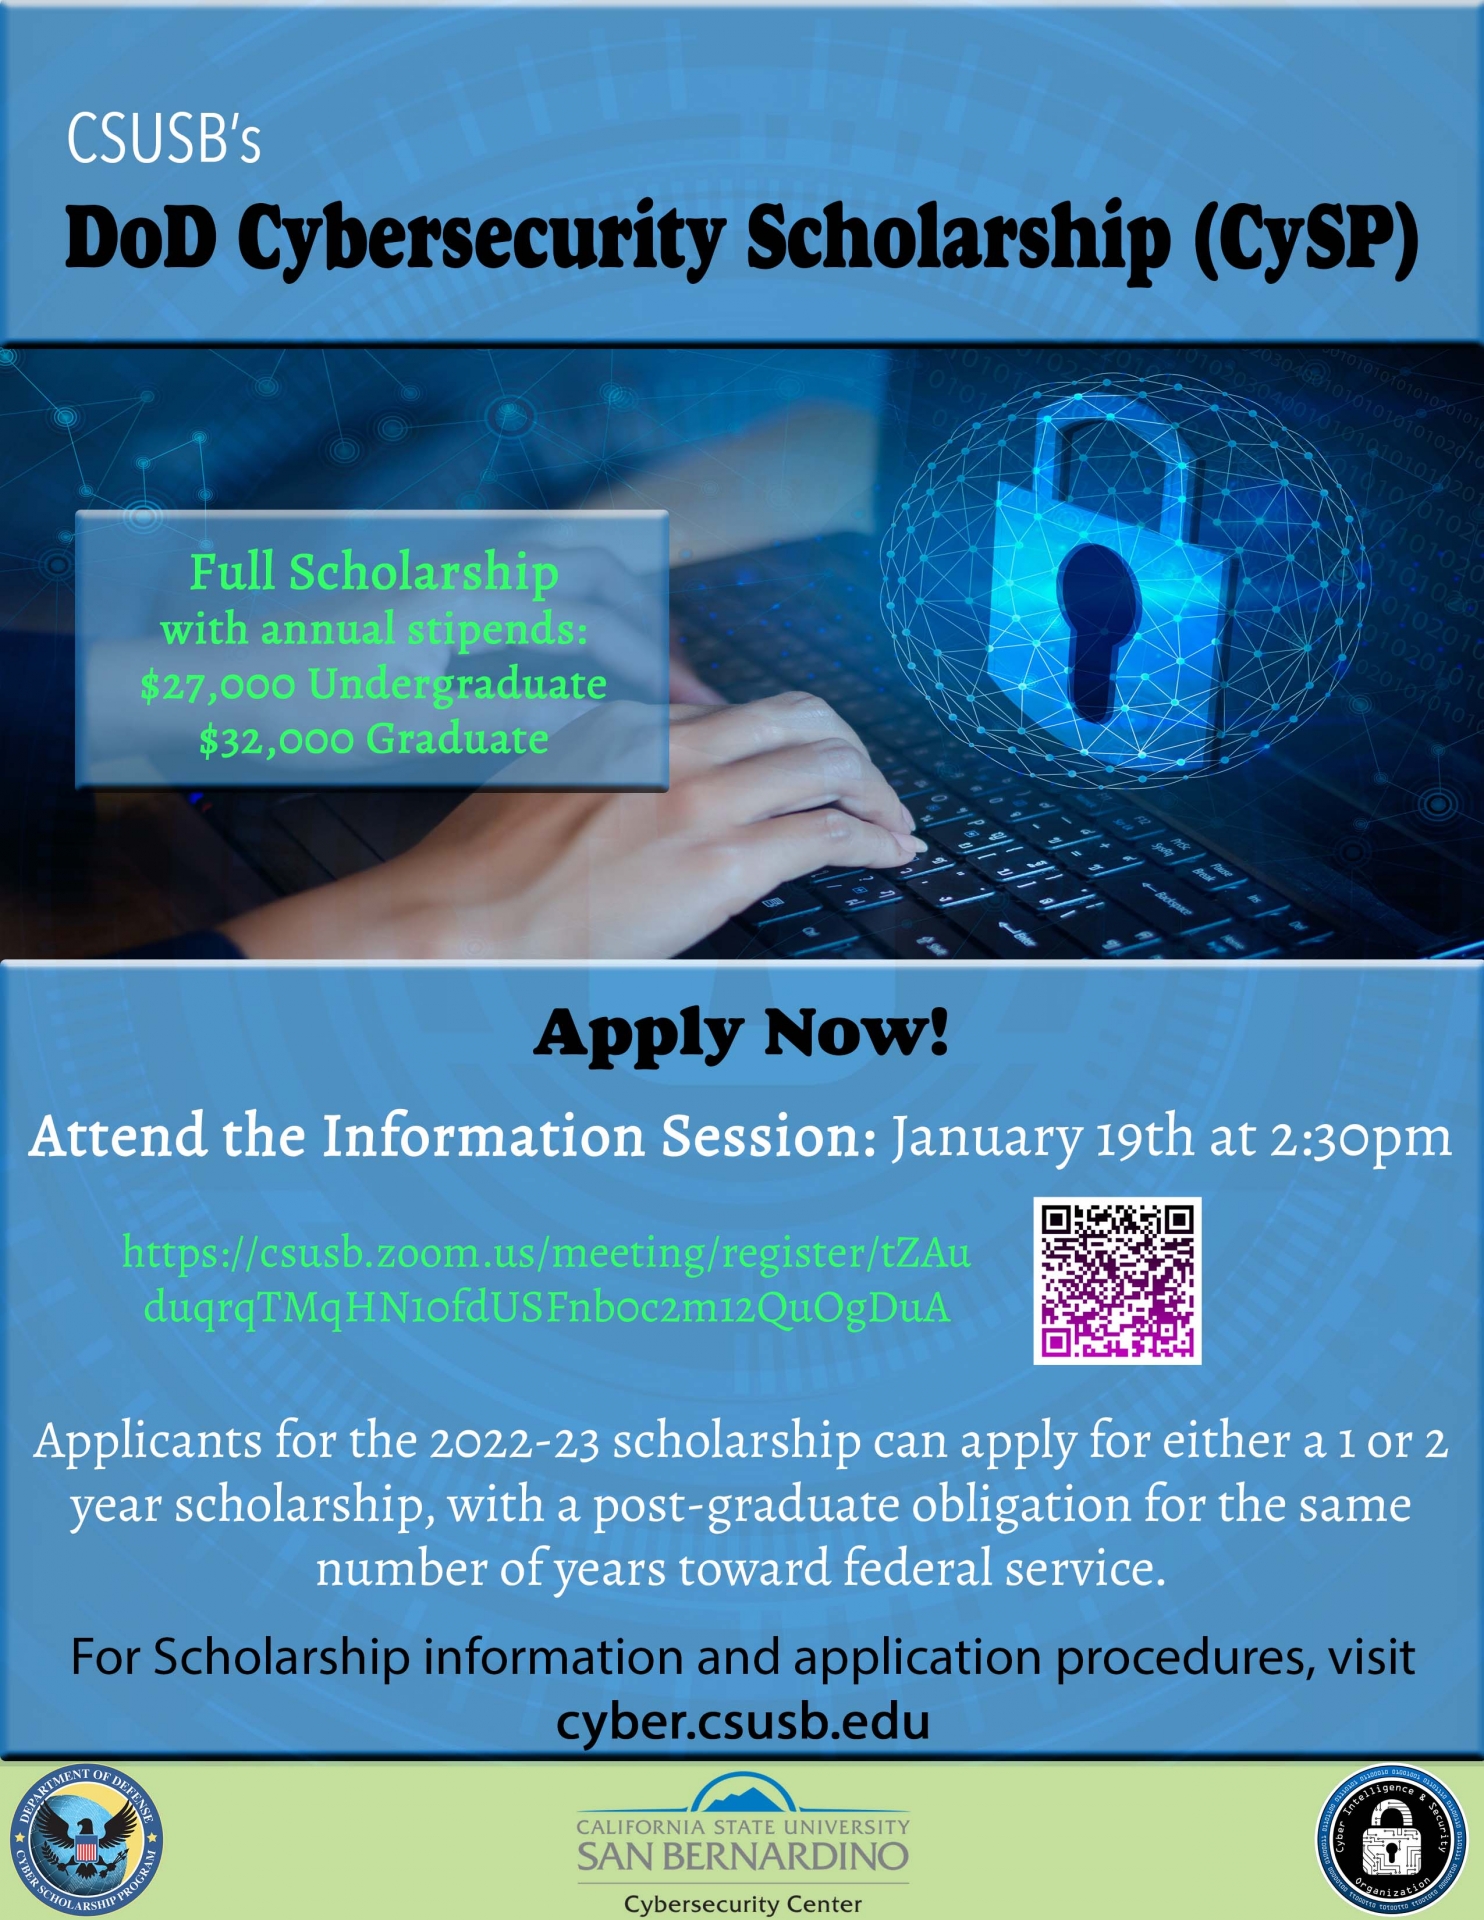 DoD CySP Info Session on January 19th at 2:30pm